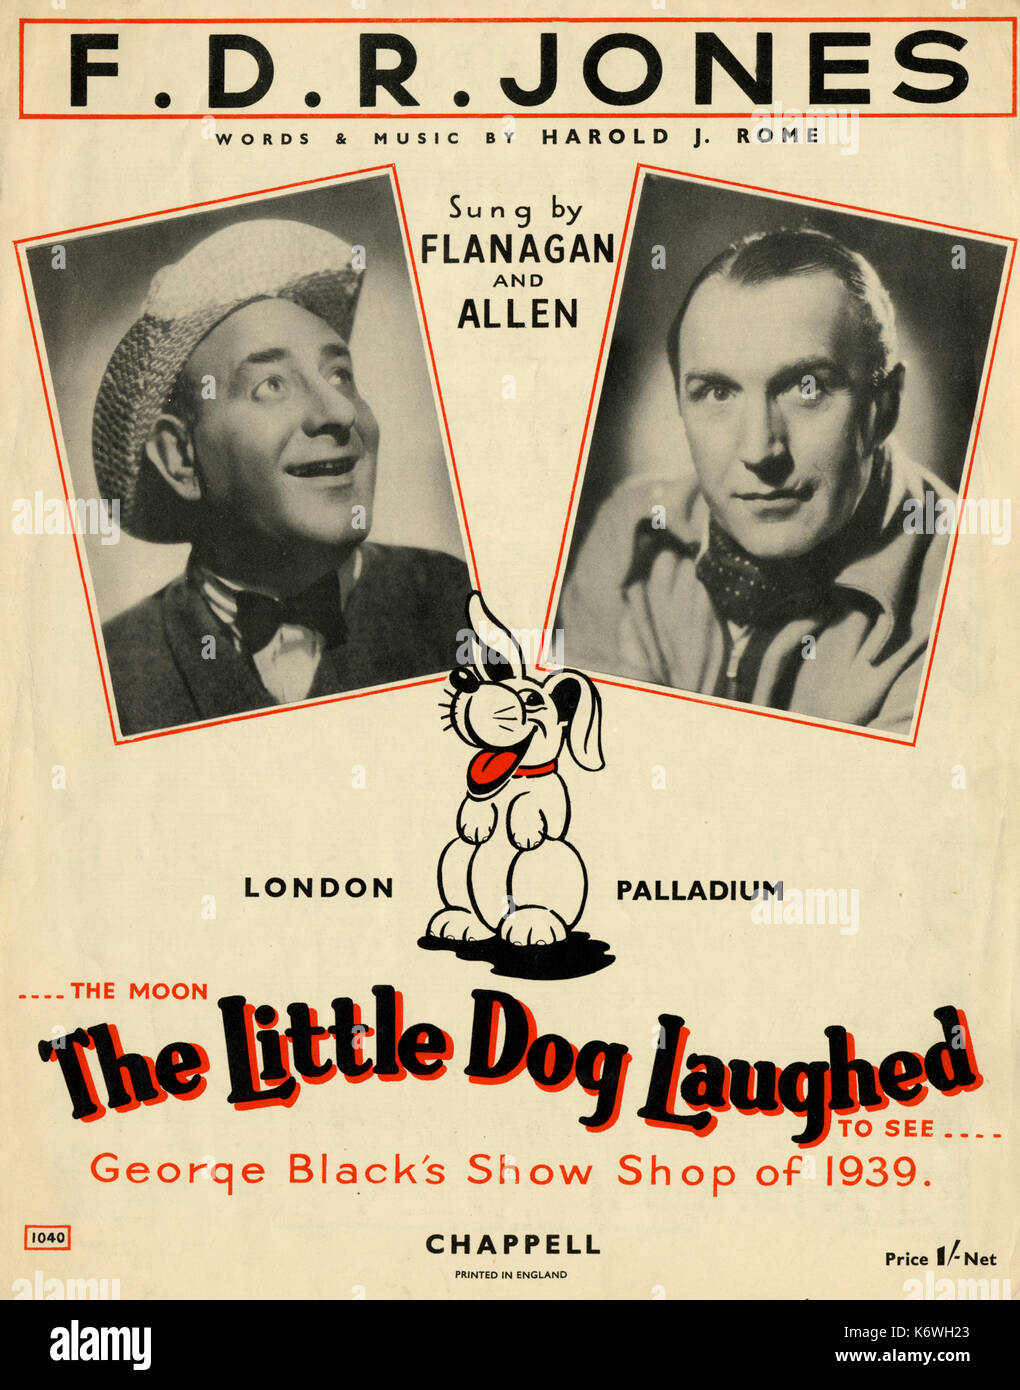 FLANAGAN & ALLEN - Cover of score of ' F.D.R. Jones ' from 'The Little Dog Laughed...' by Harold J Rome.  George Black's Show Shop of 1939.  Published London, Chappell. Stock Photo